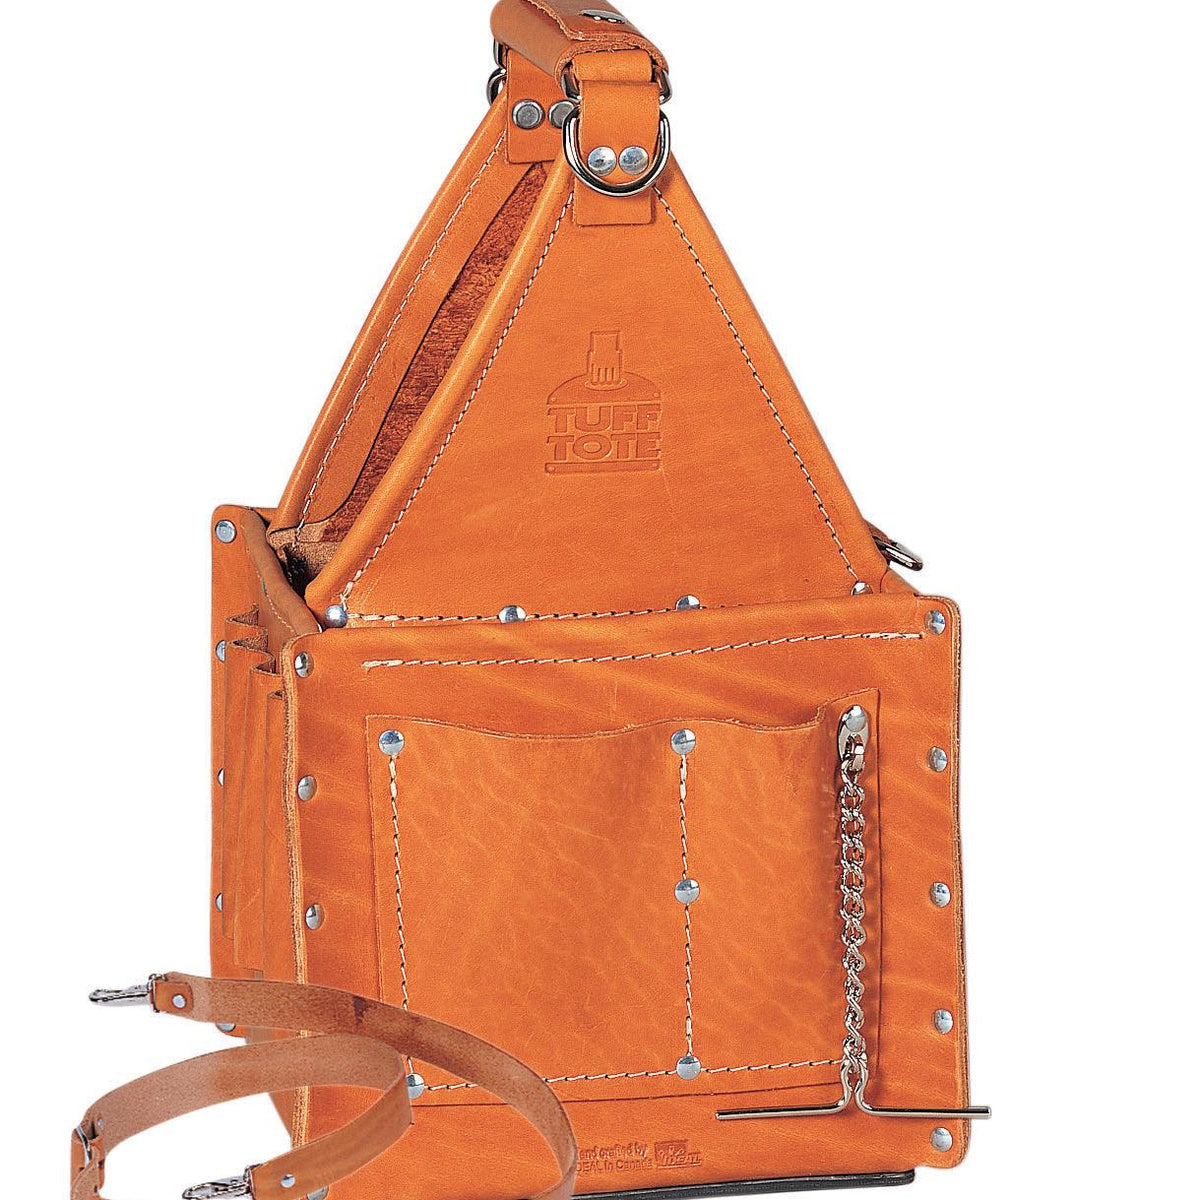 IDEAL Tuff Tote Ultimate Tool Carrier Premium Tan Leather, Model